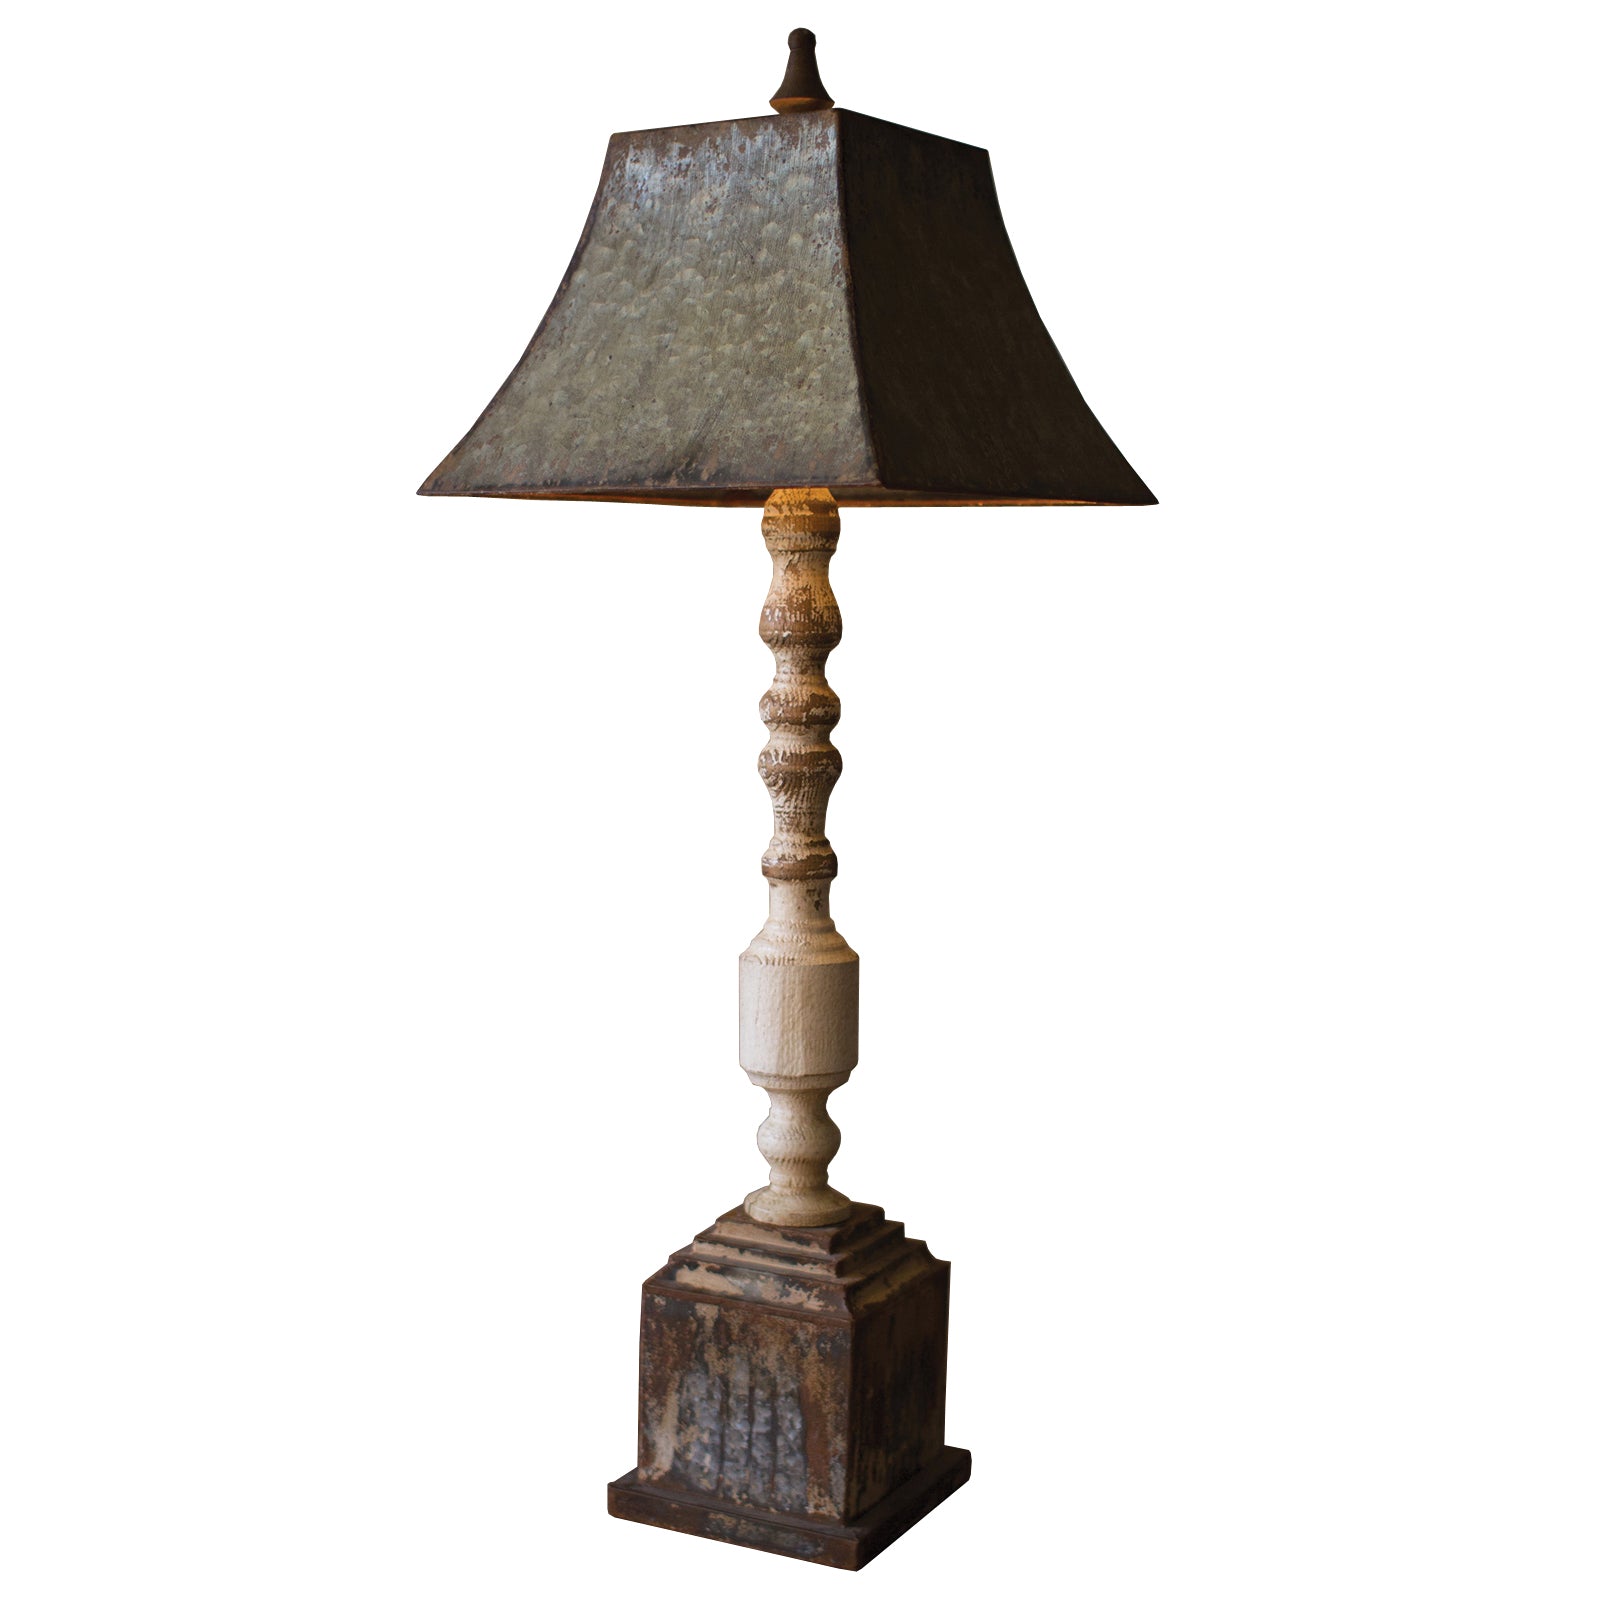 Rustic Turned Wood Banister Table Lamp With Metal Shade